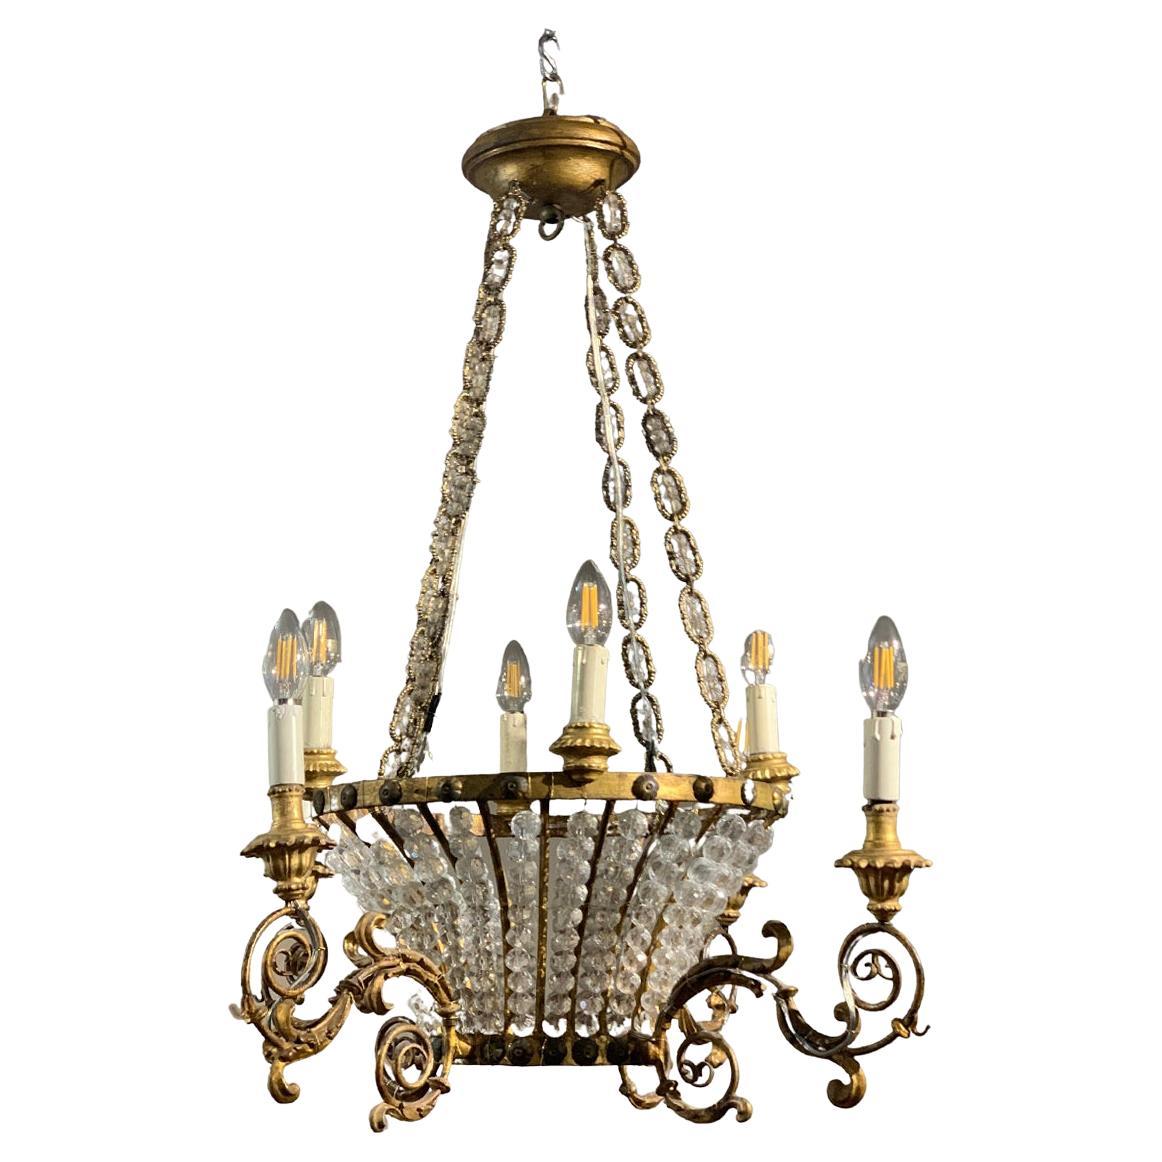 Early 19th Century Vatican State Chandelier